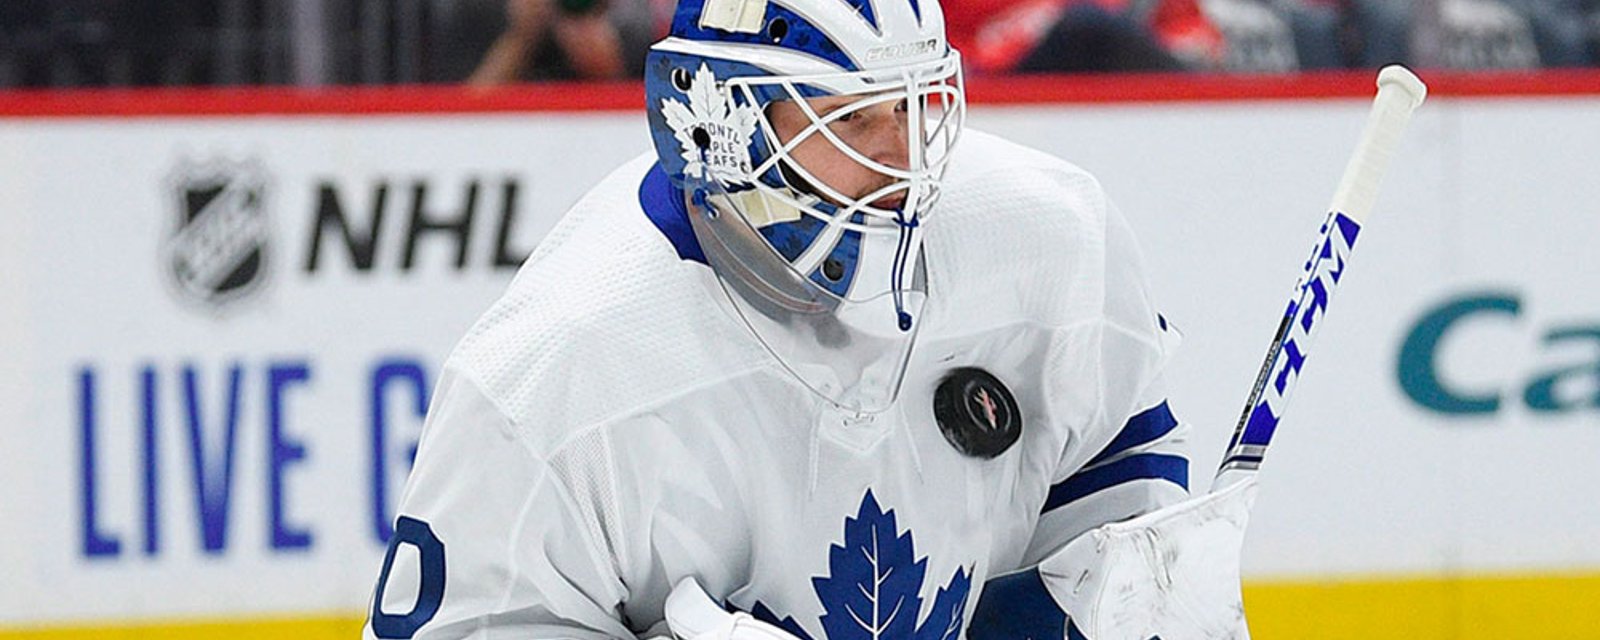 Report: Dubas eyeing the trade market “every day” for a backup goalie